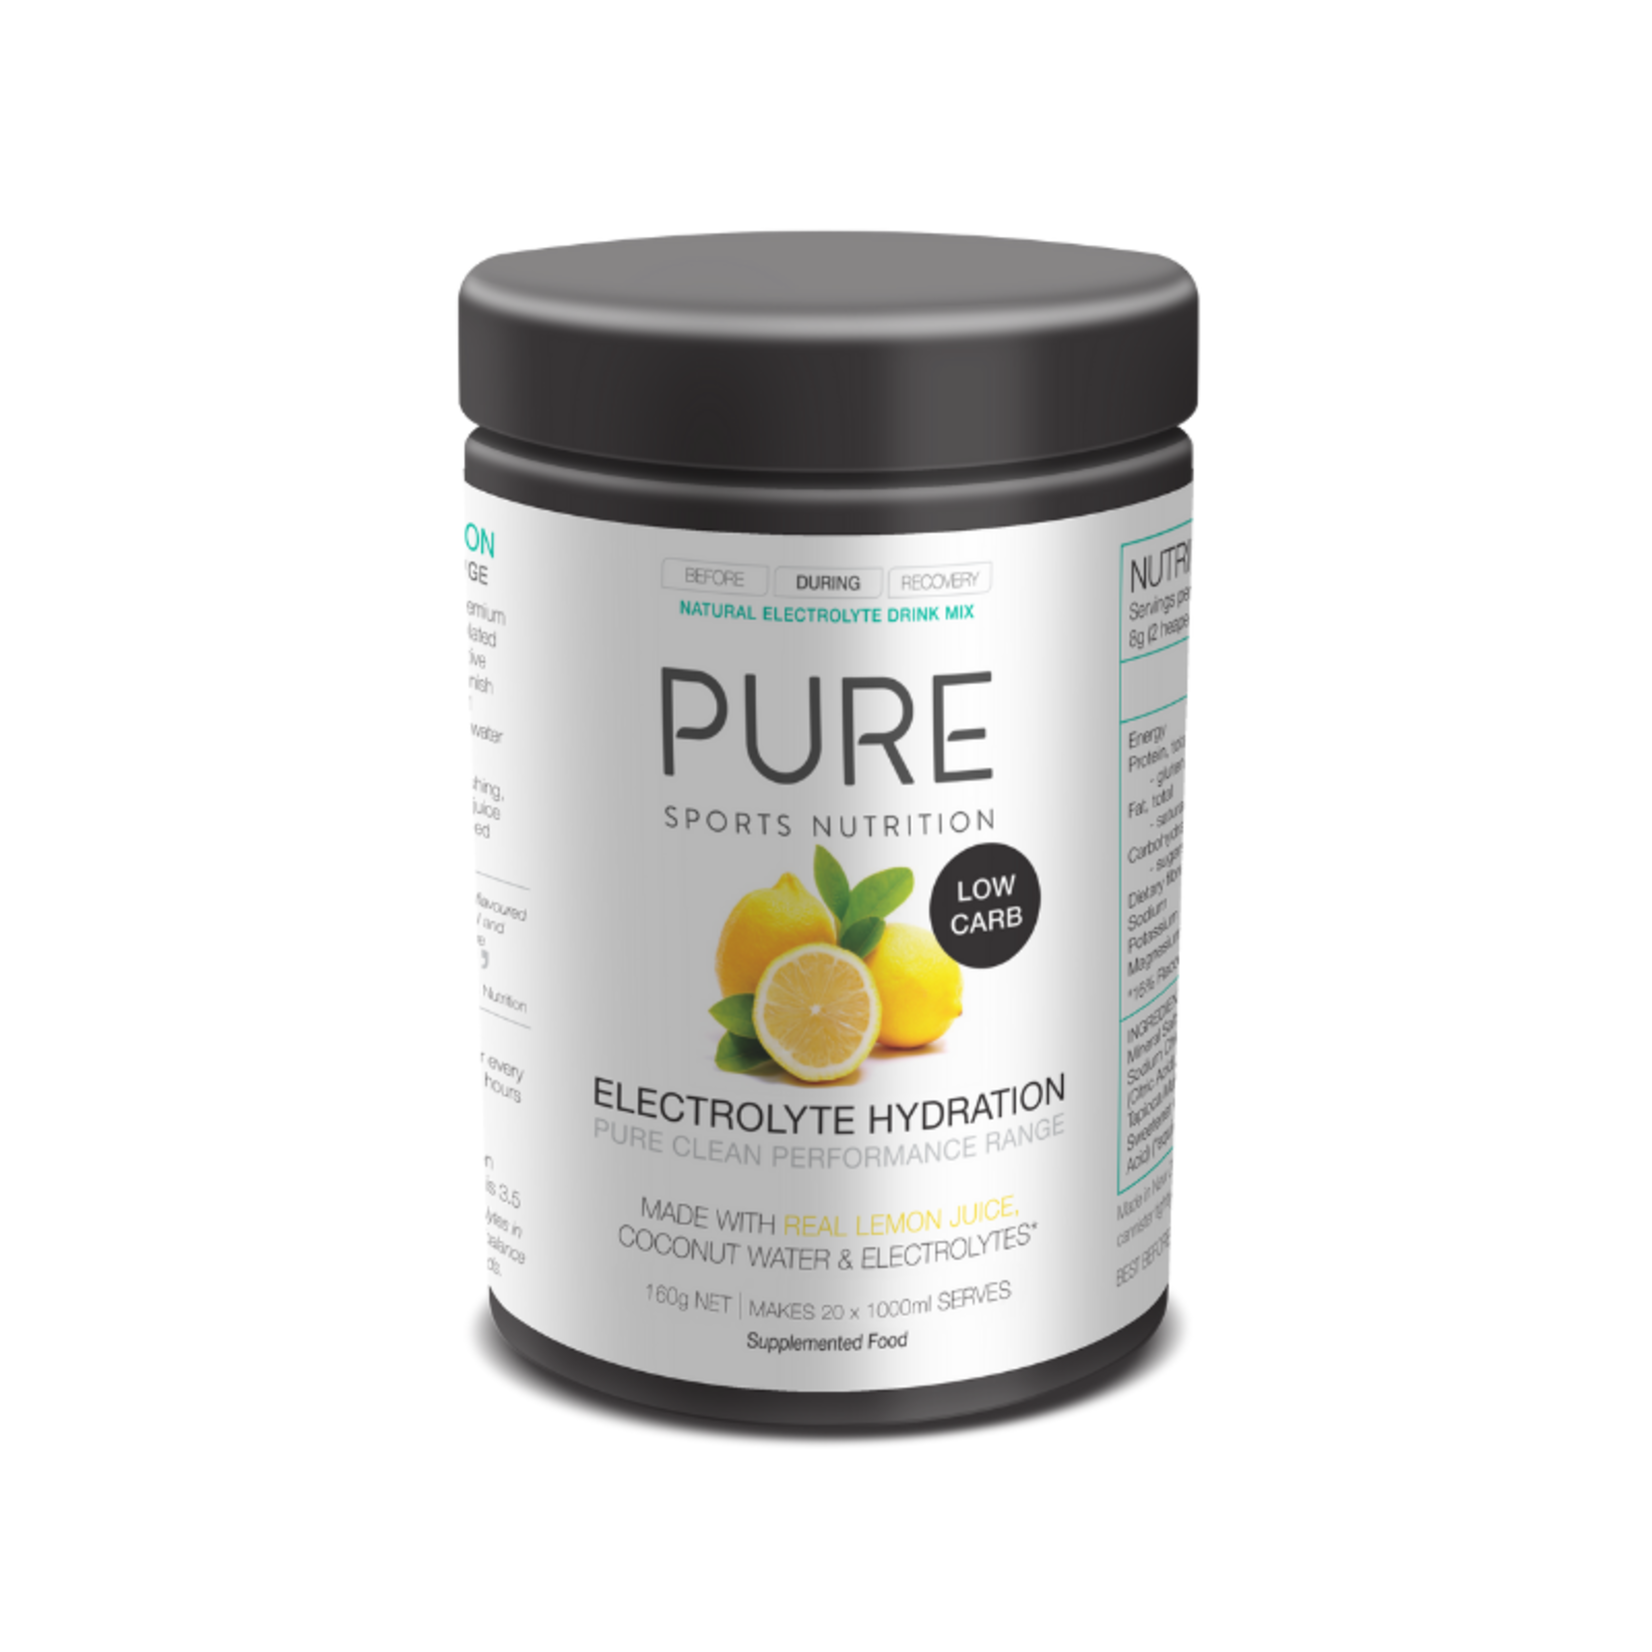 Pure PURE Electrolyte Hydration Low Carb